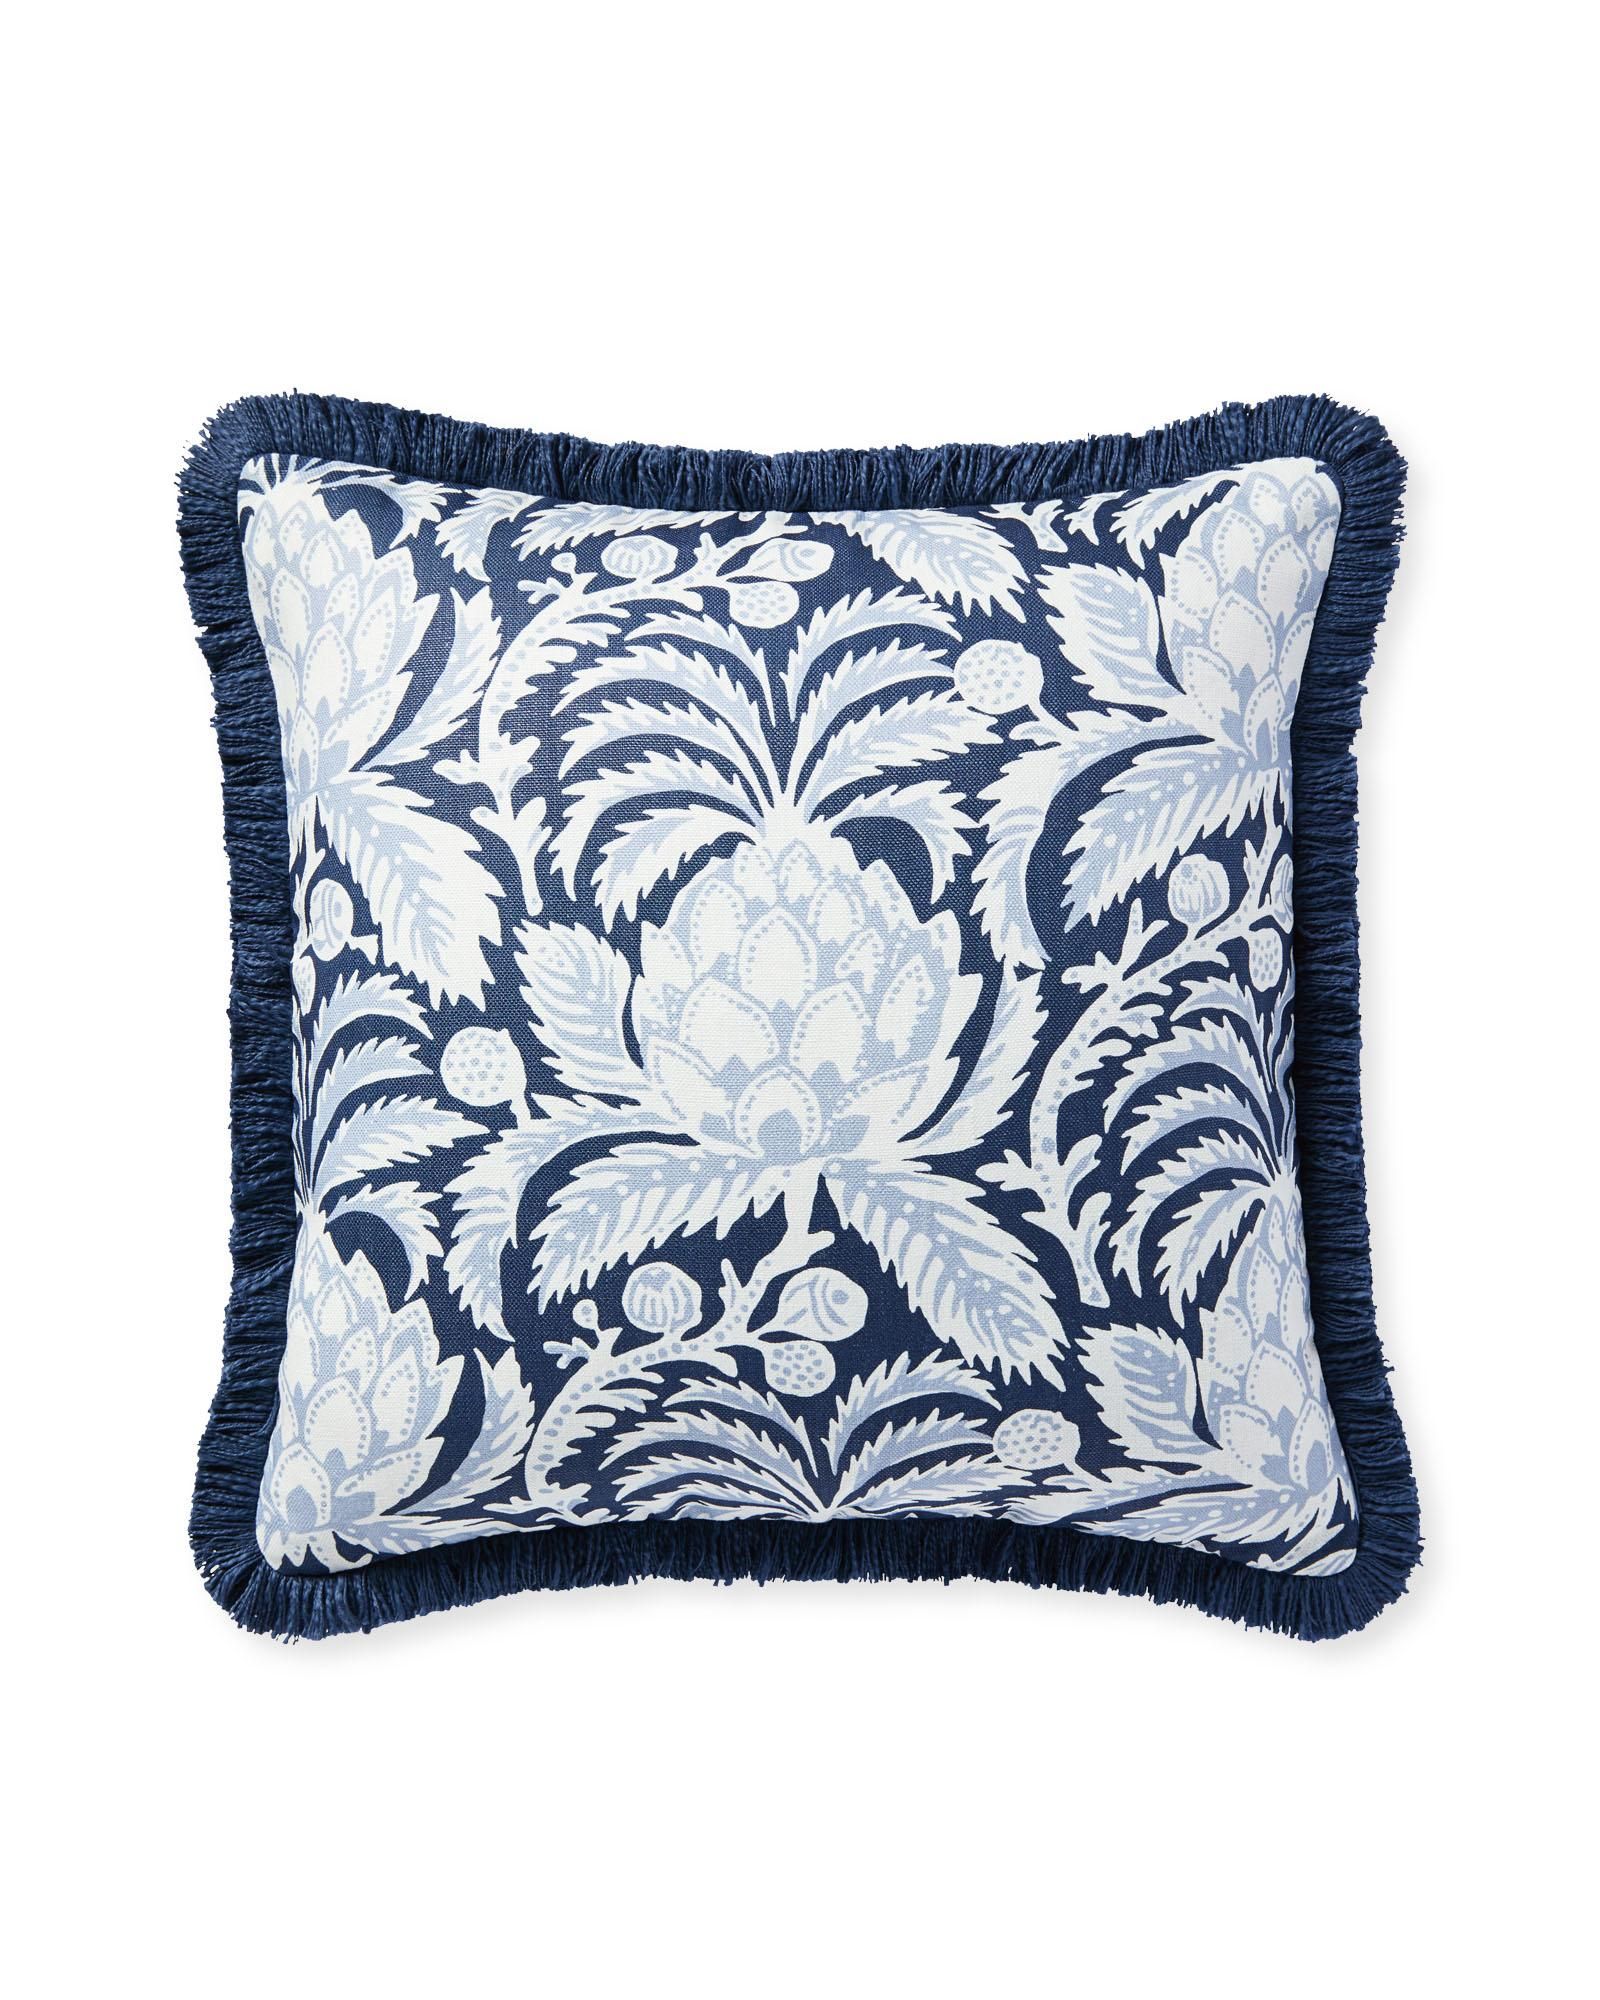 Artichoke Pillow Cover | Serena and Lily